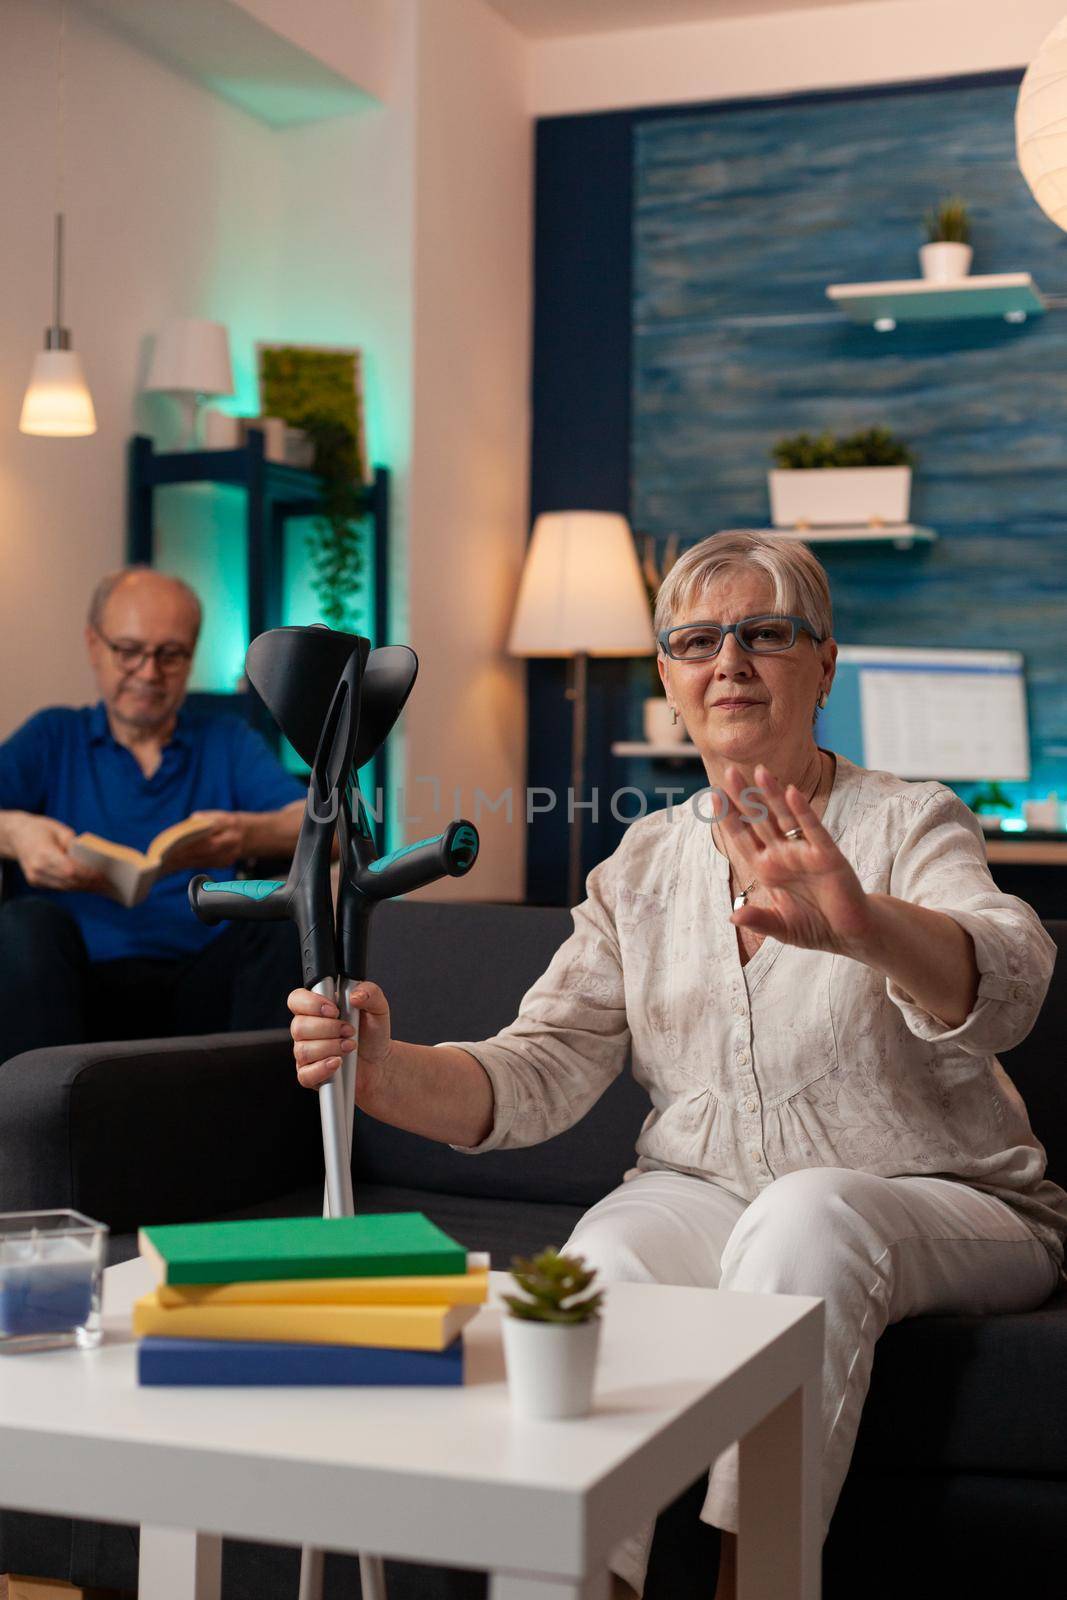 Retired woman with crutches waving on video call conference at home. Older wife using online remote communication while disabled husband sitting in wheelchair in living room background